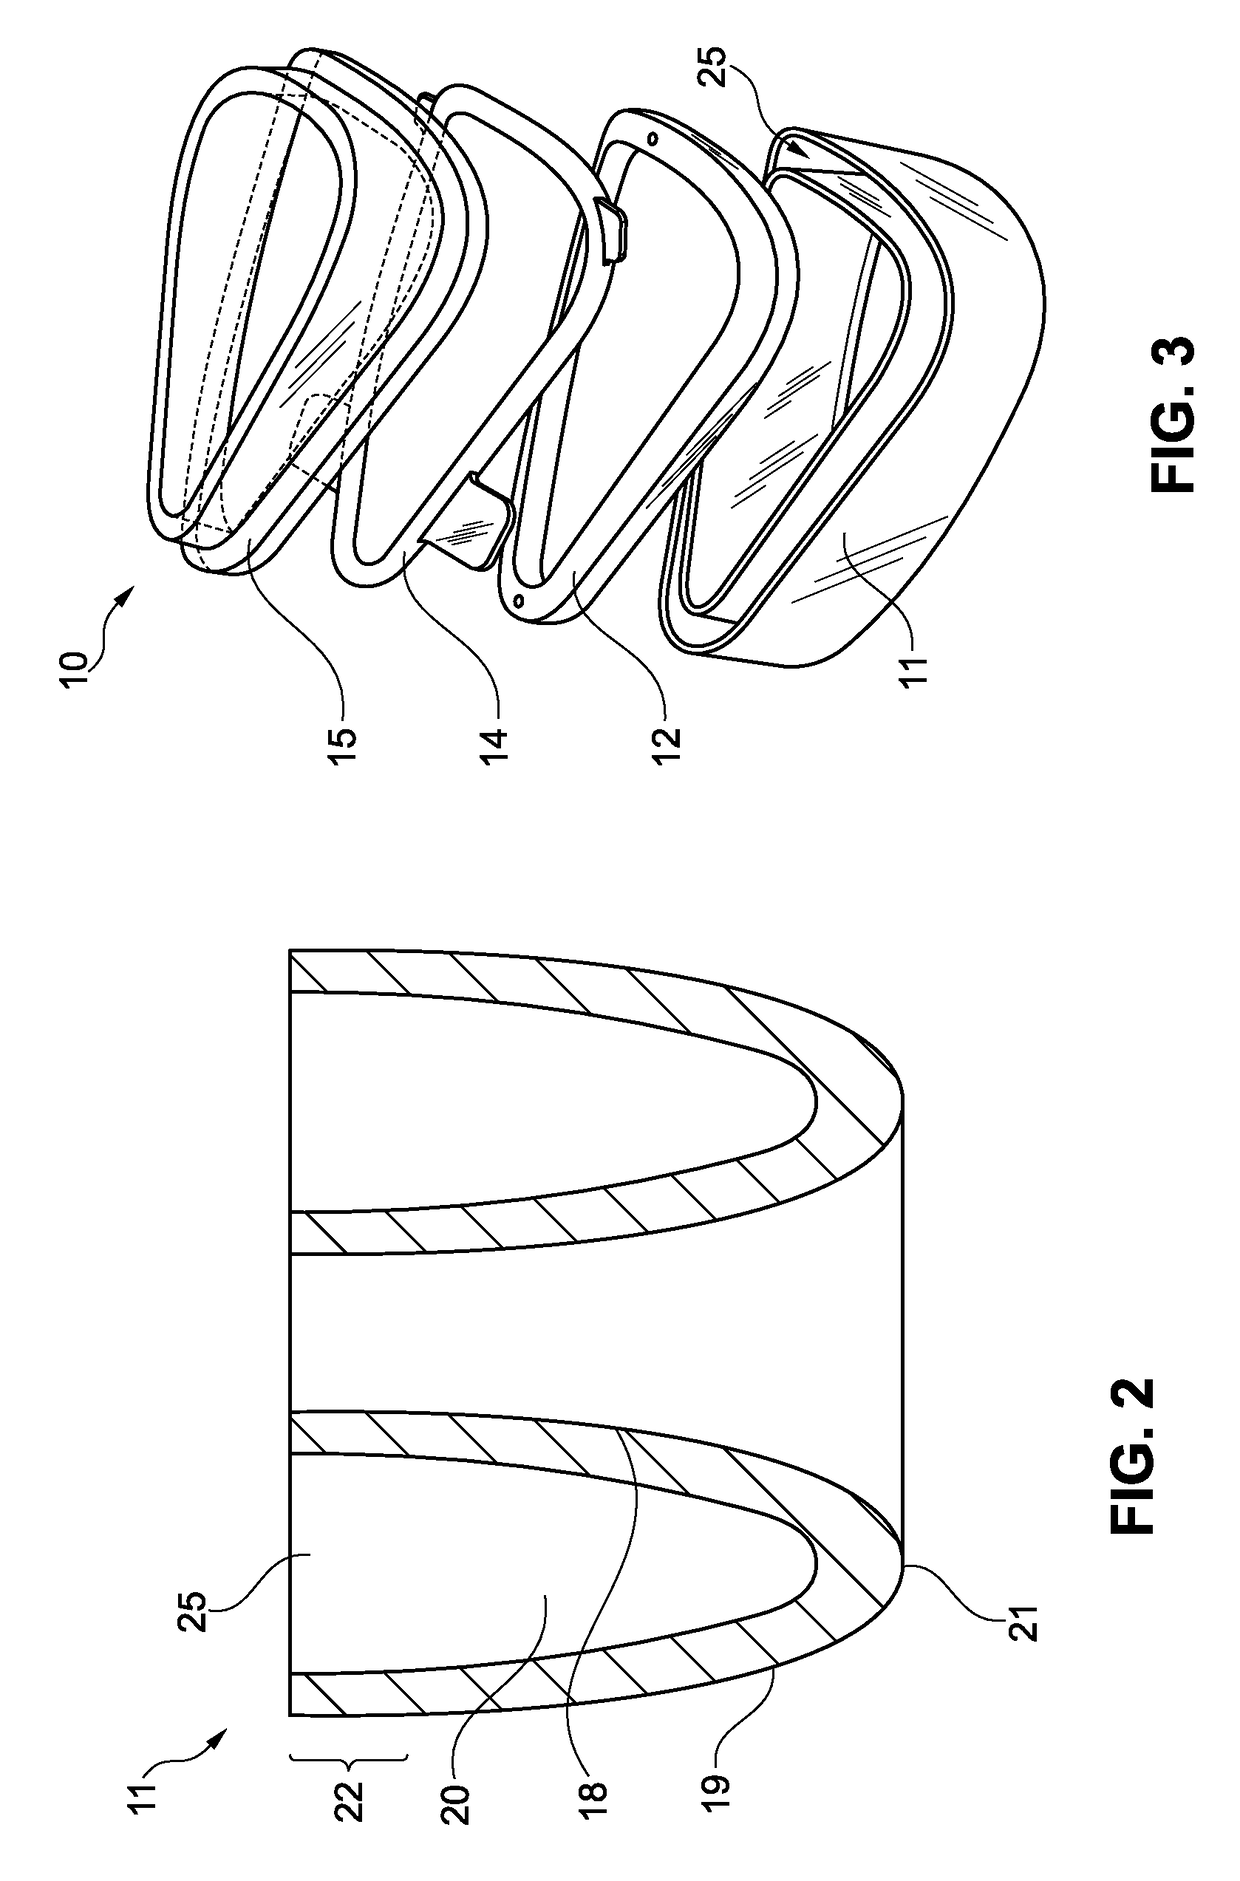 Method for producing a filled hollow structure